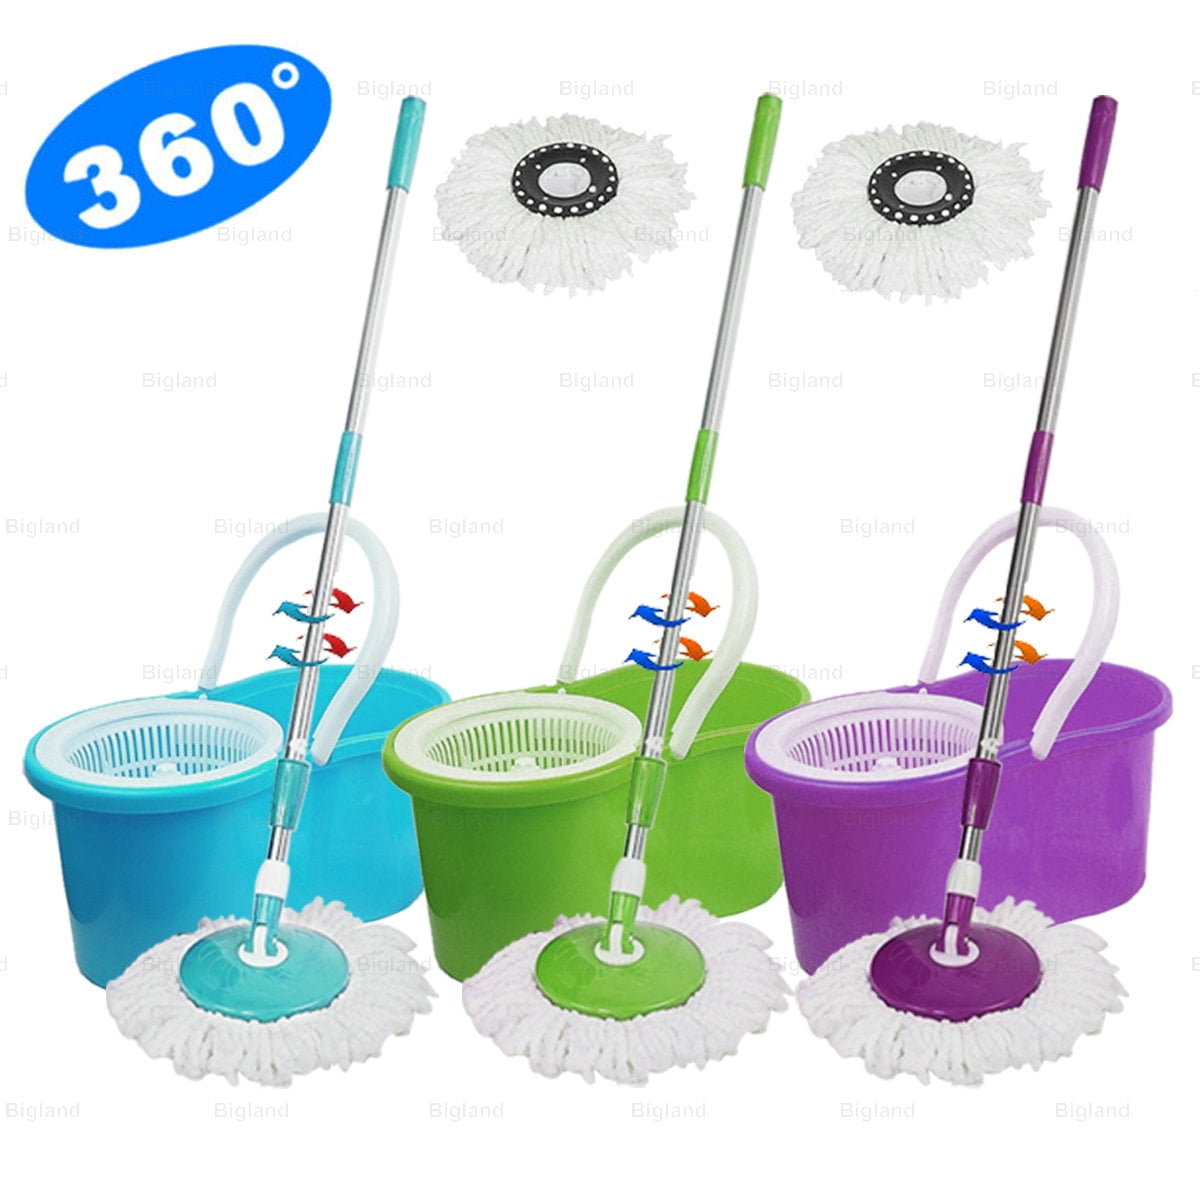 360°Spinning Rotating Mop Bucket Wringer Set Microfiber Cleaning Heads 